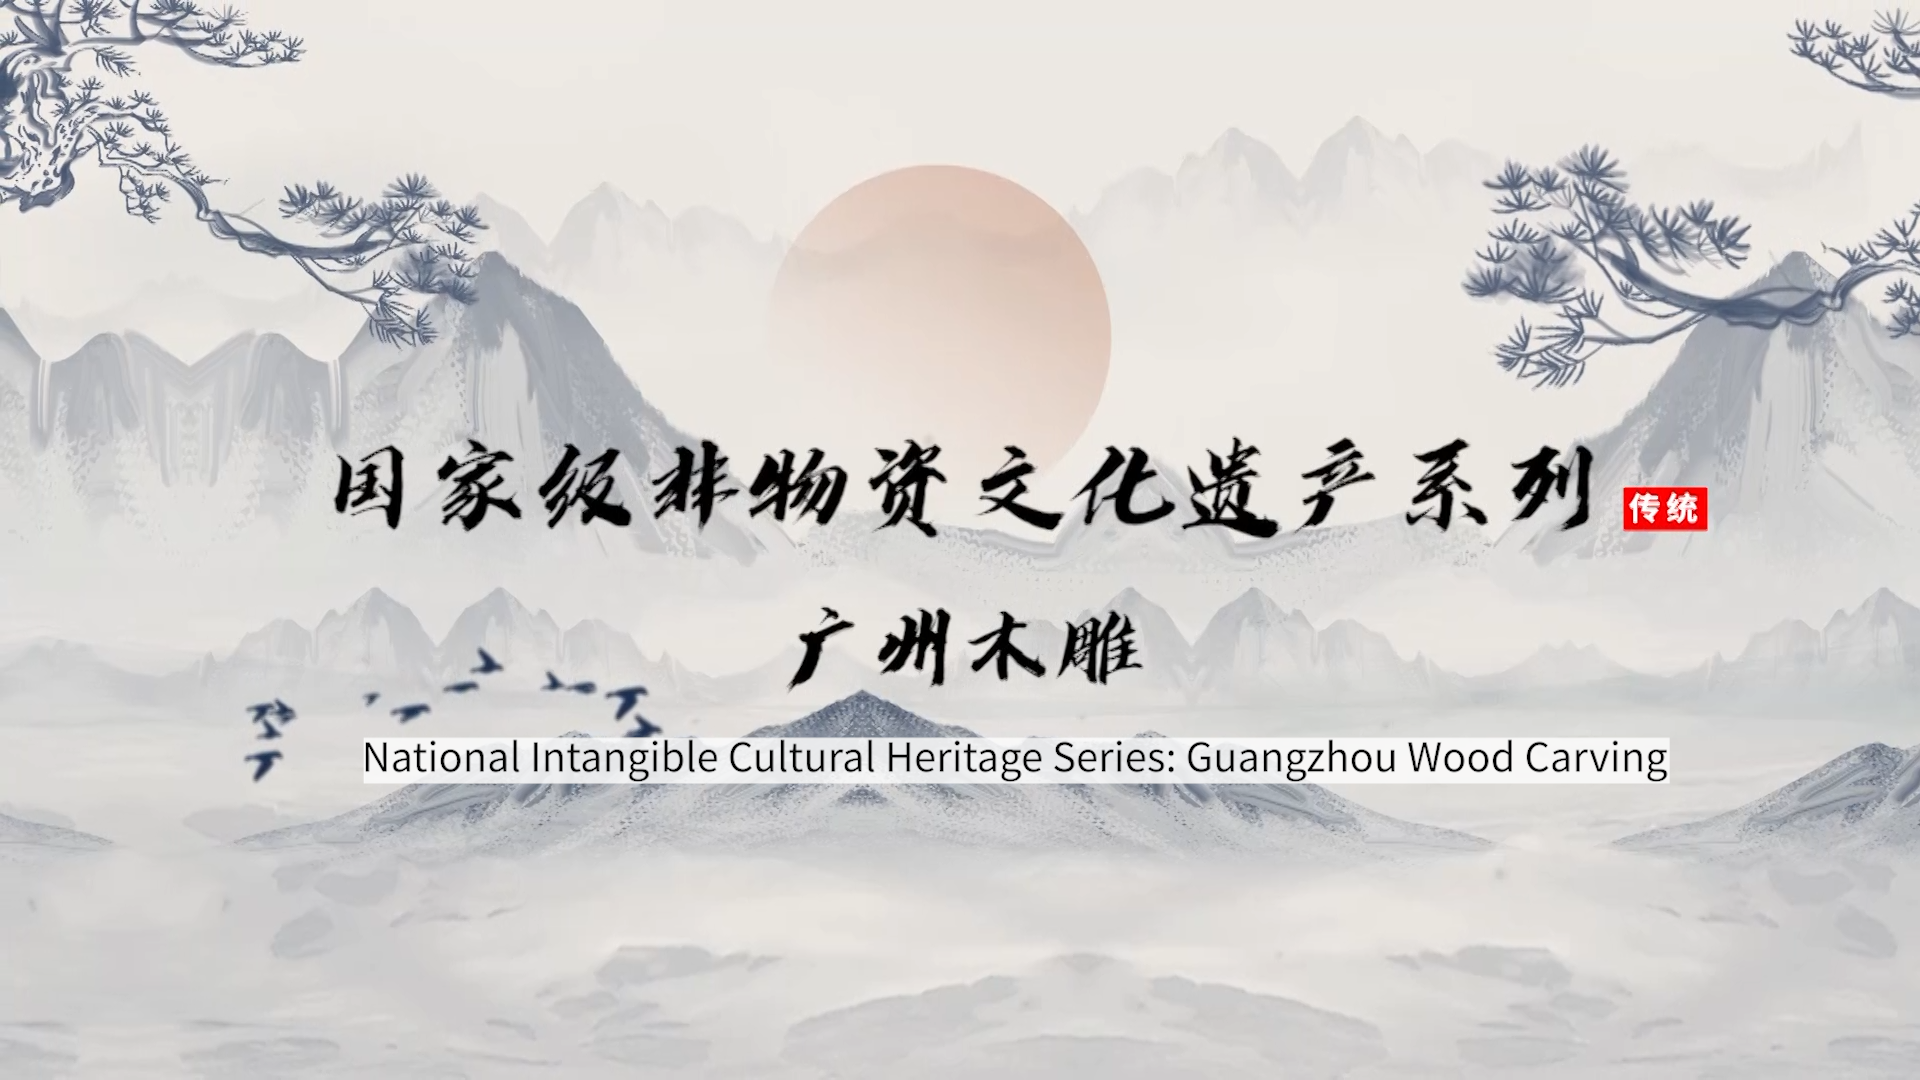 National Intangible Cultural Heritage Series Guangzhou Wood Carving